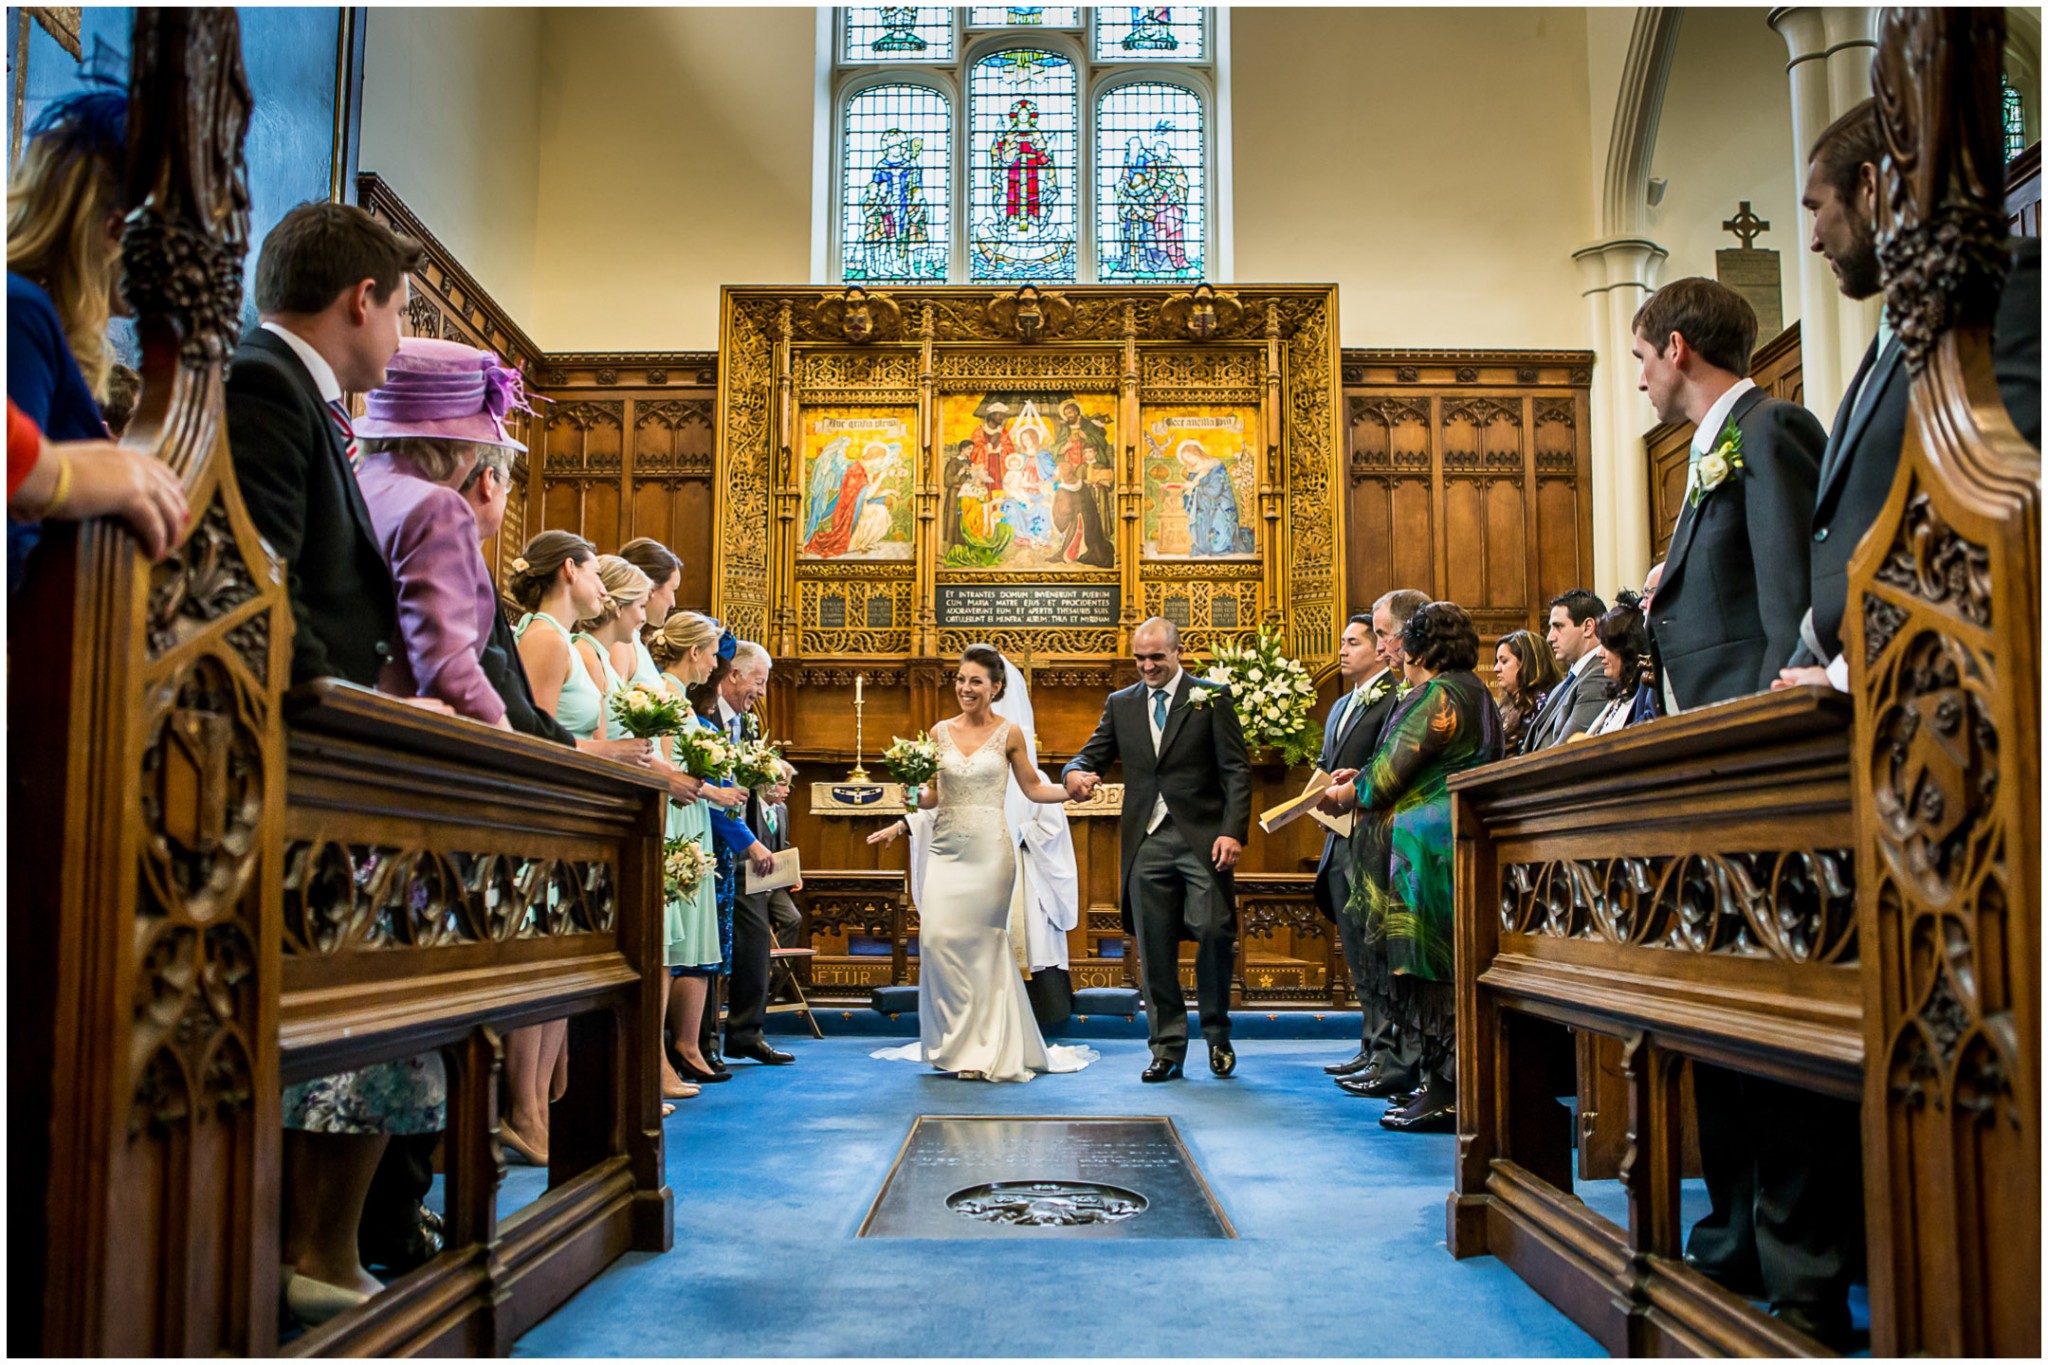 dulwich-picture-gallery-wedding-photography-034